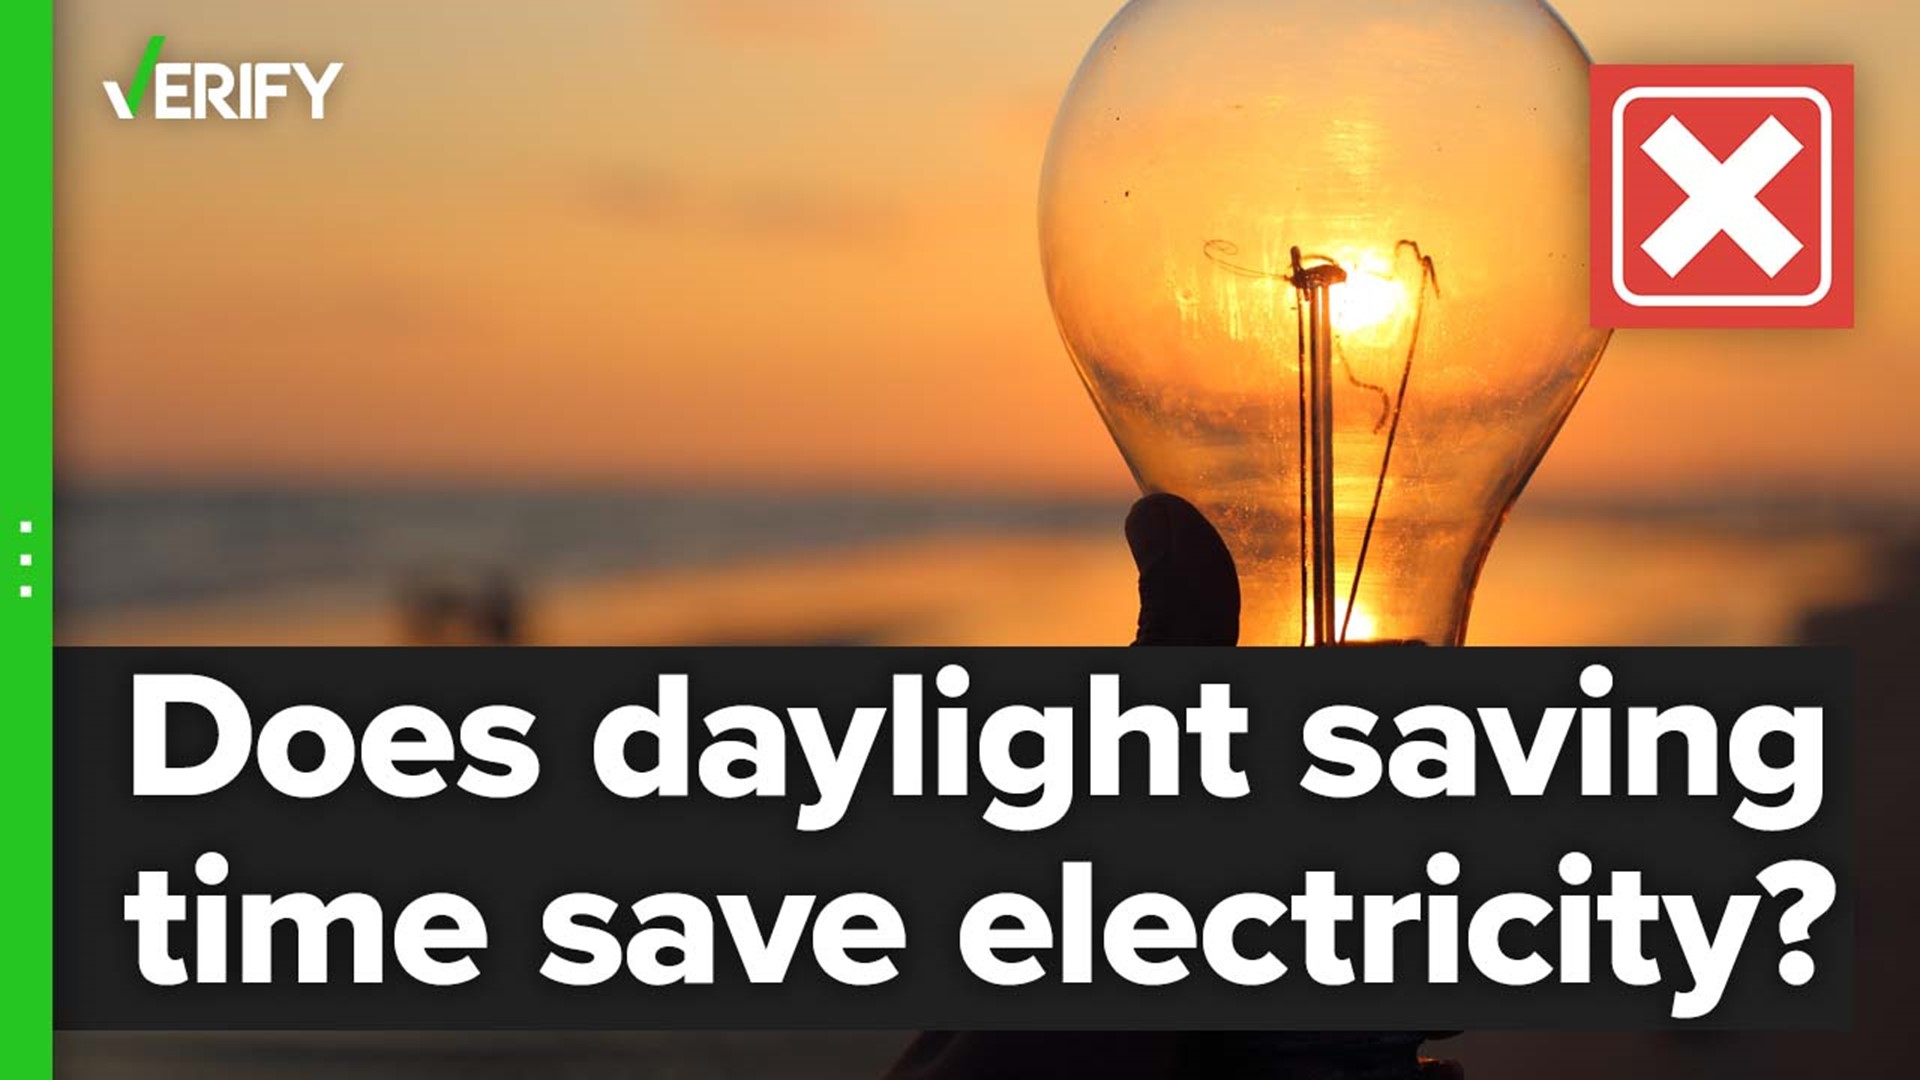 Studies have found daylight saving time has led to little, if any, reduction in electricity use.